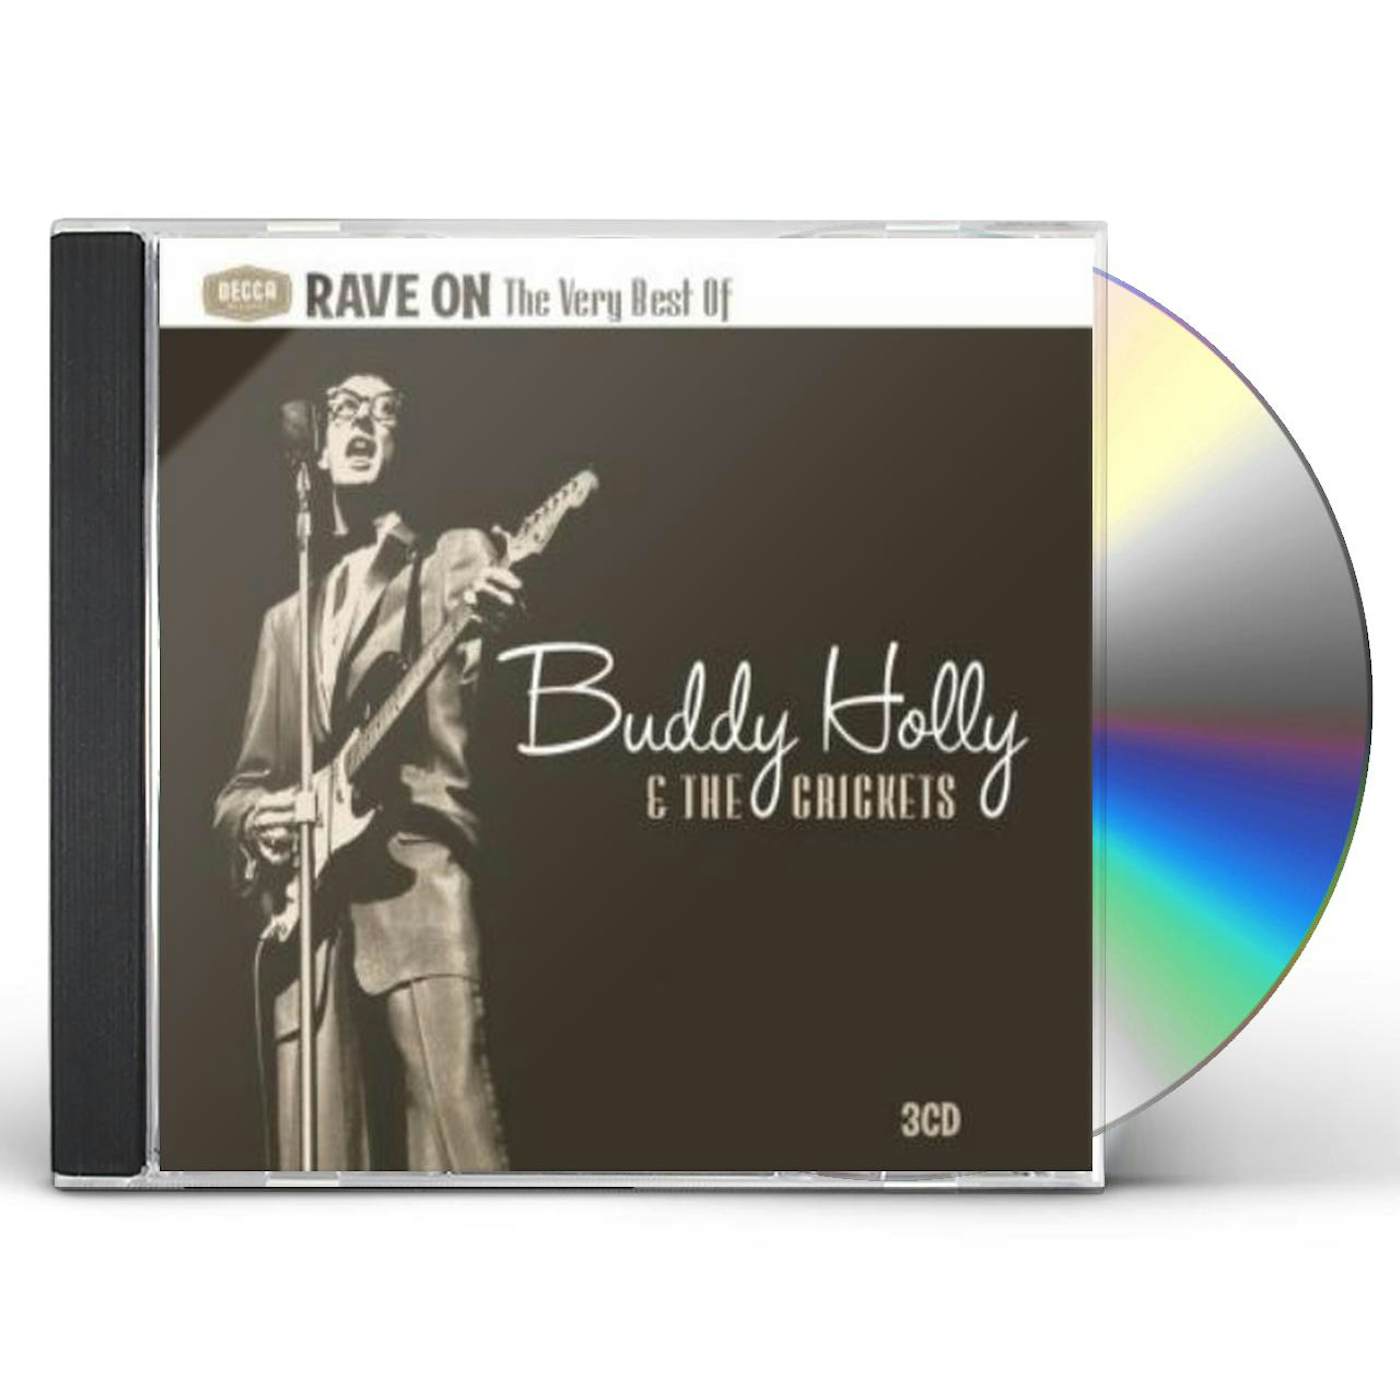 Buddy Holly & The Crickets RAVE ON: VERY BEST OF CD